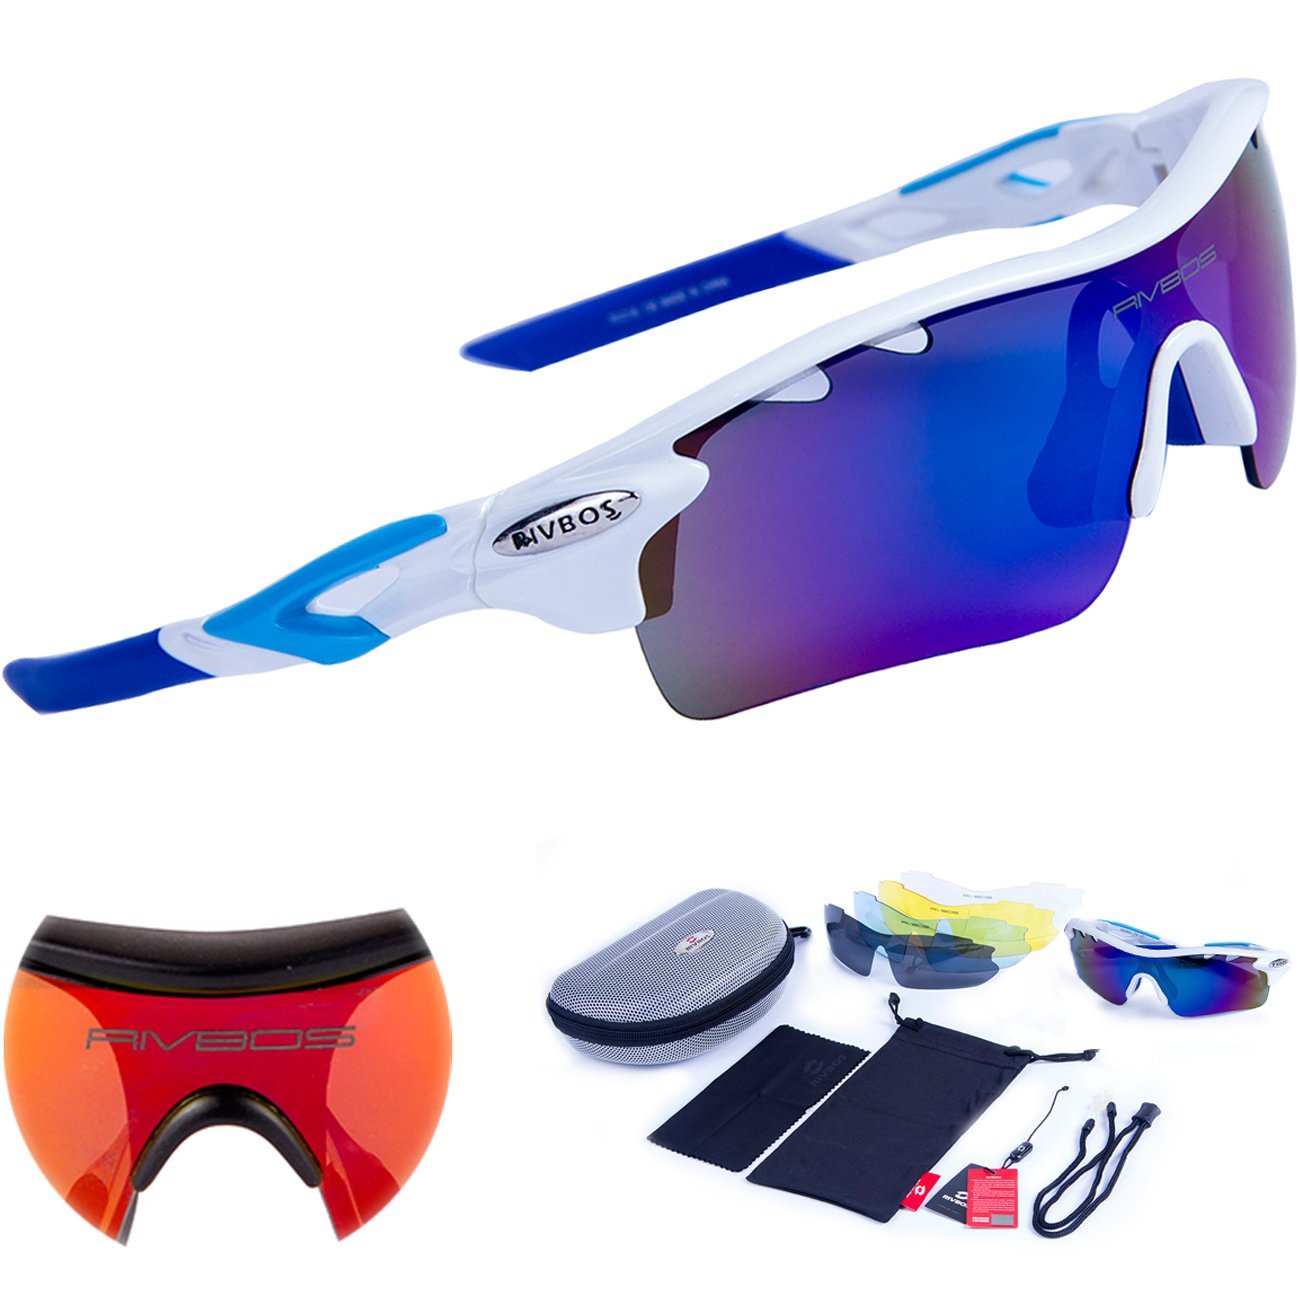 RIVBOS Polarized sunglasses with interchangeable lenses